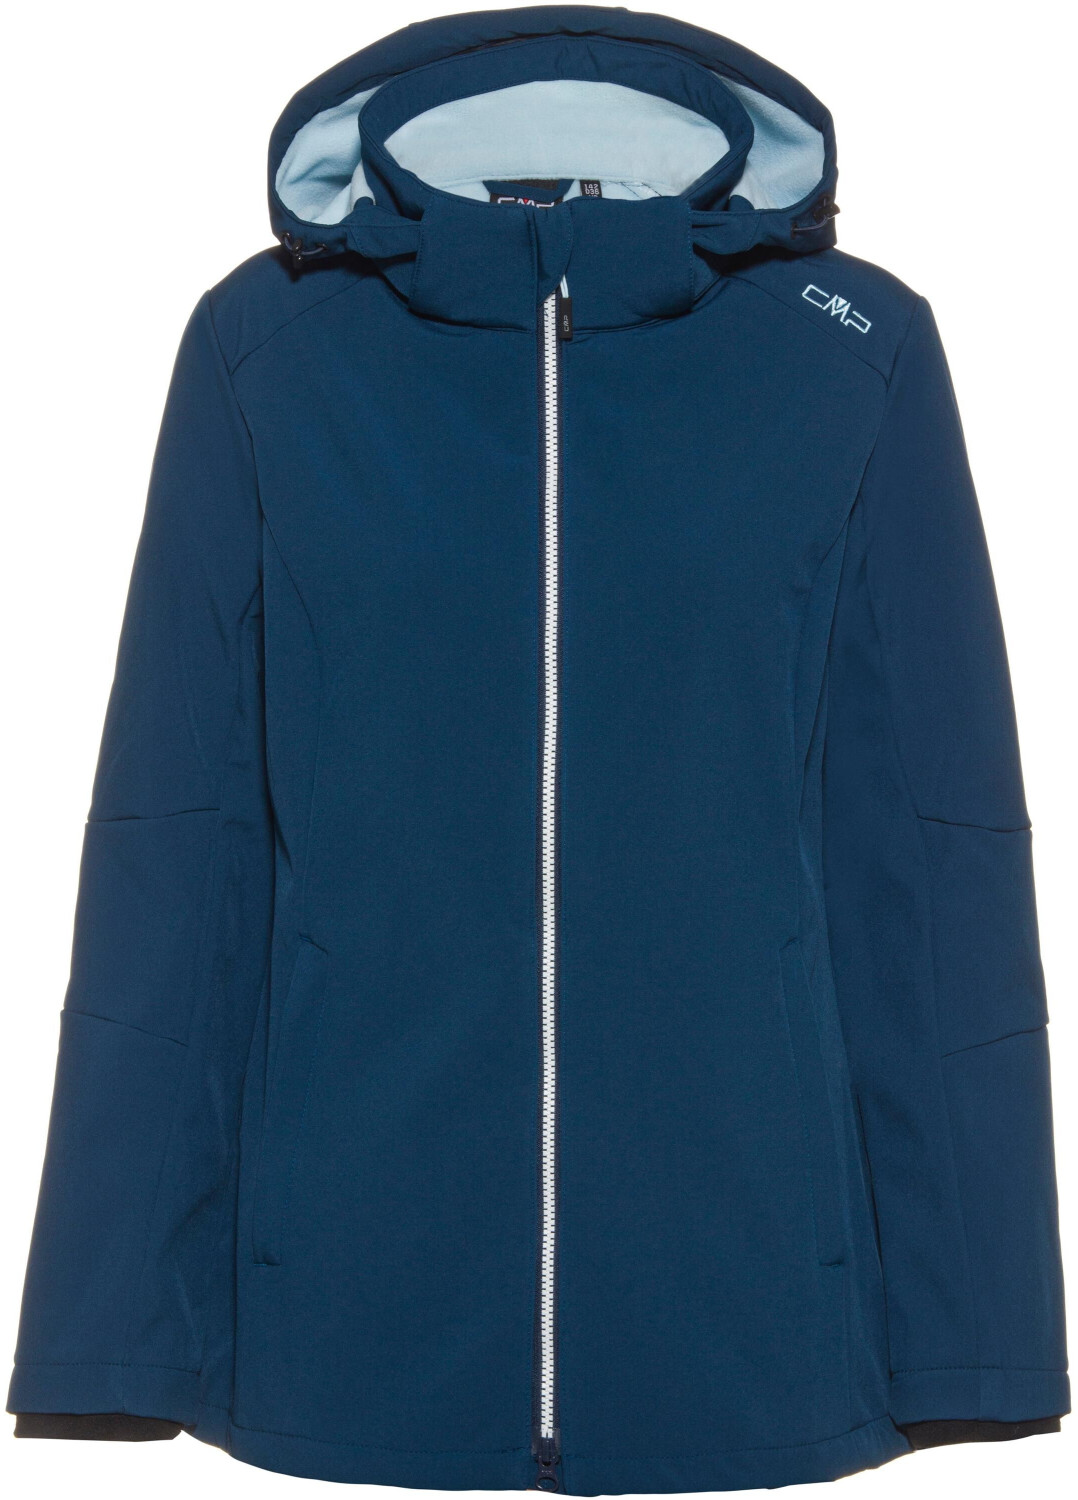 Comfortable ink/cristal CMP Softshell Long (3A22226) 39,99 Preisvergleich With ab | Jacket Fit blue € bei blue Woman